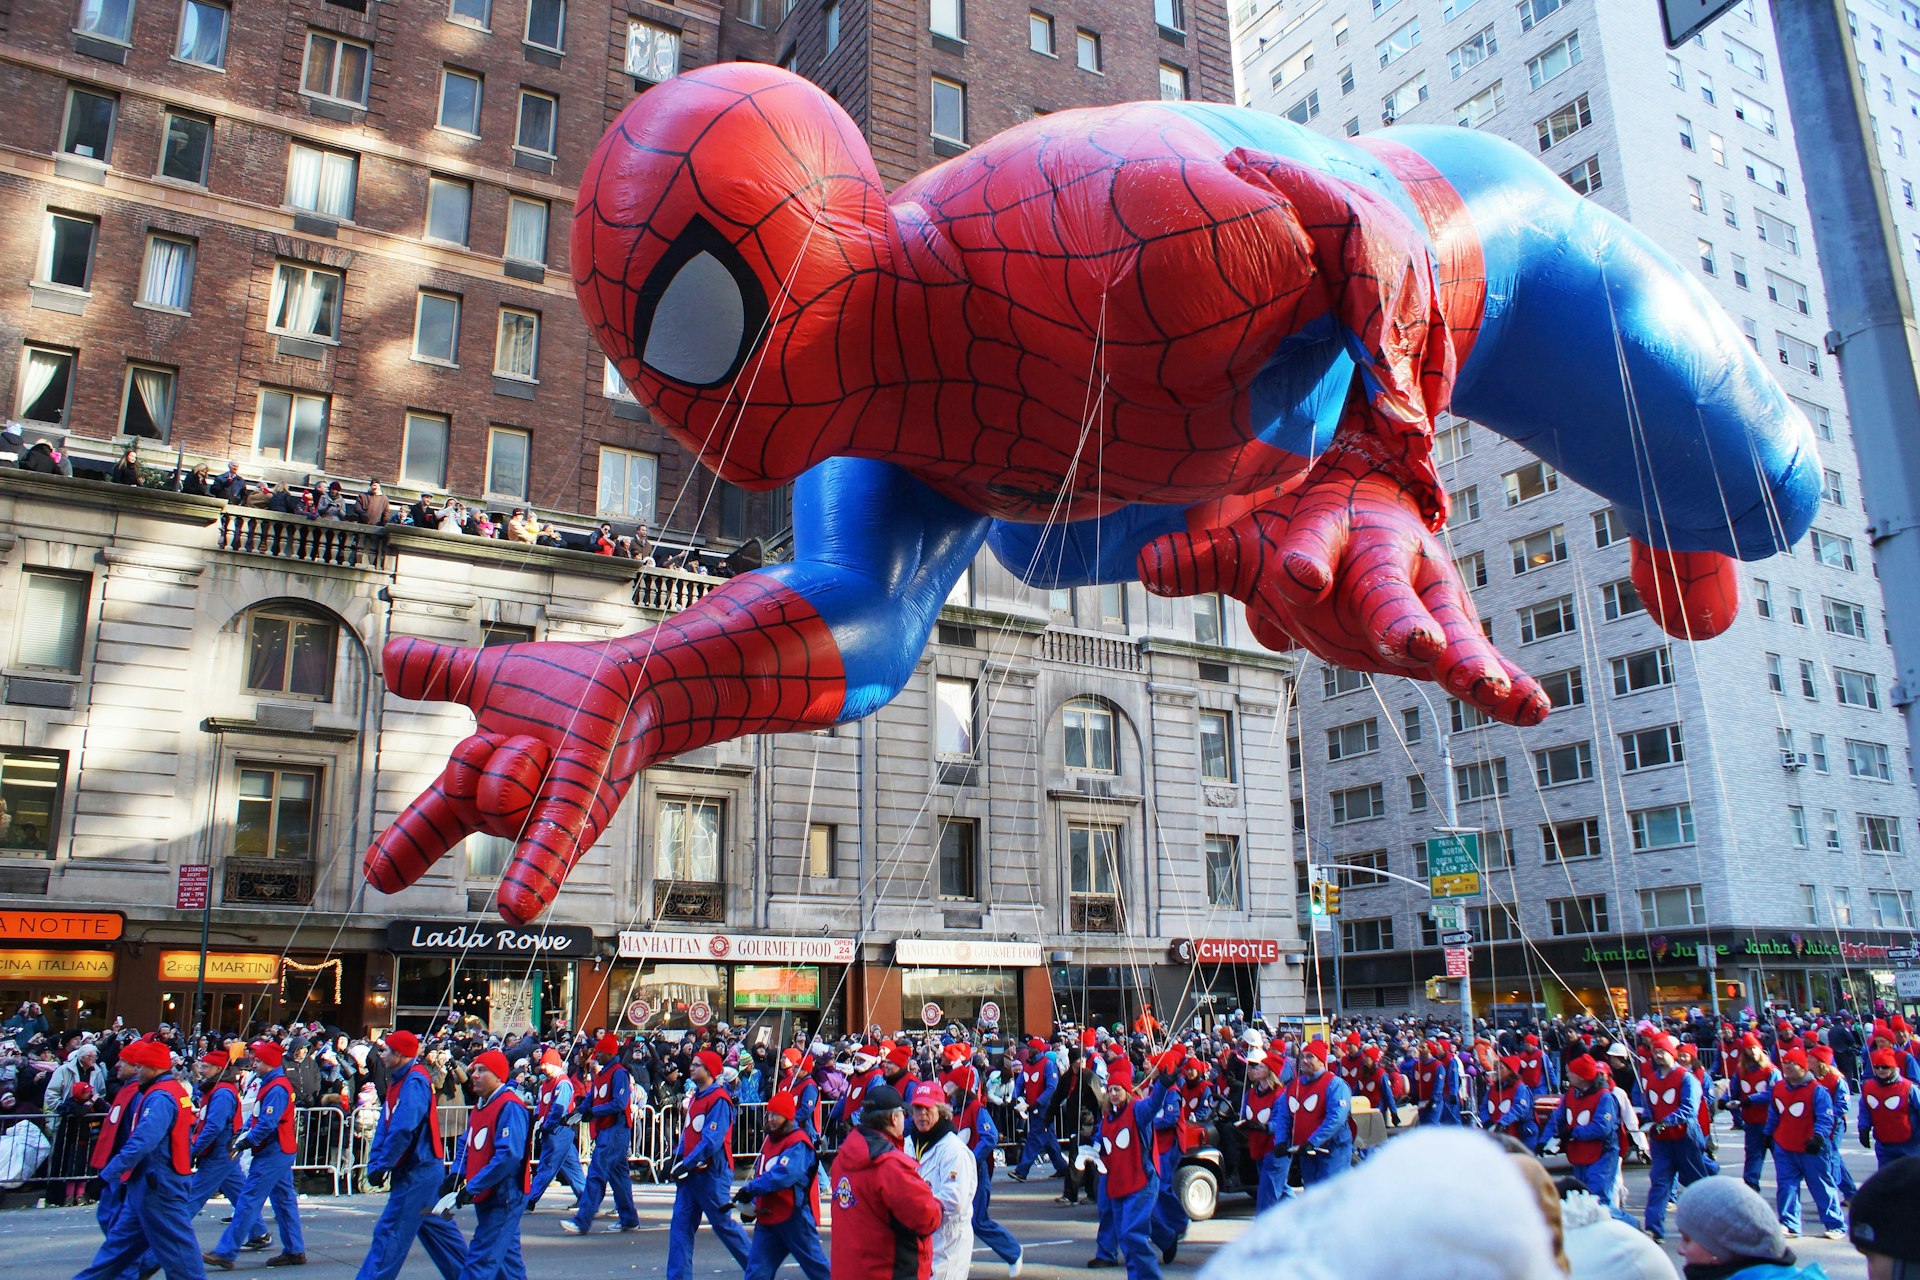 A Spiderman balloon at the  87th Annual Macy's Thanksgiving Day Parade. Spiderman left arm was deflated by a Central Park tree